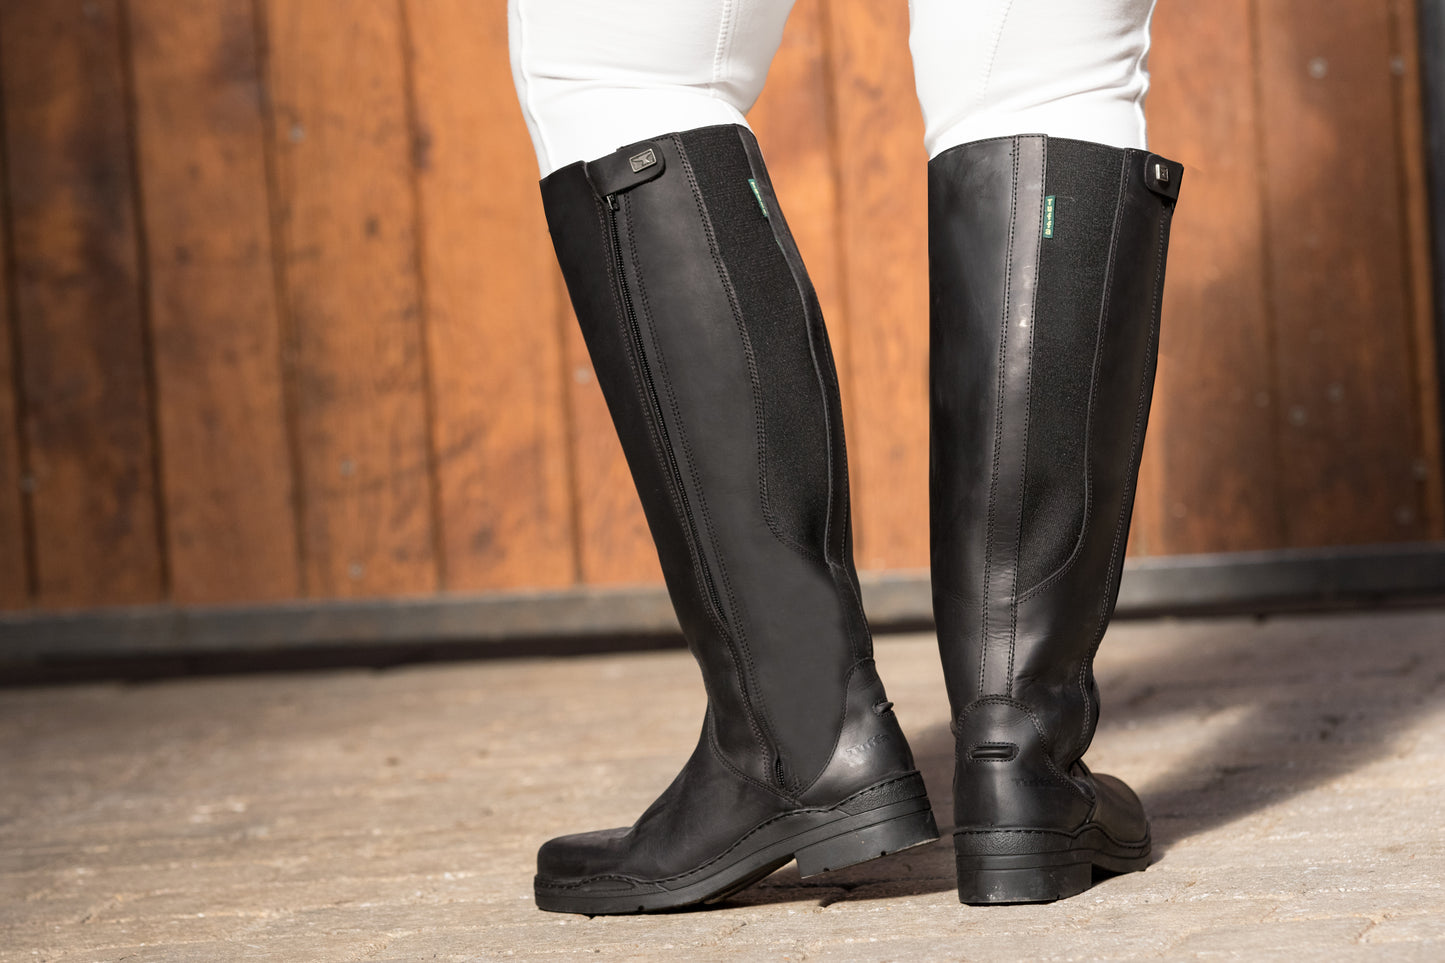 Breckland Plus-Size Riding Boots